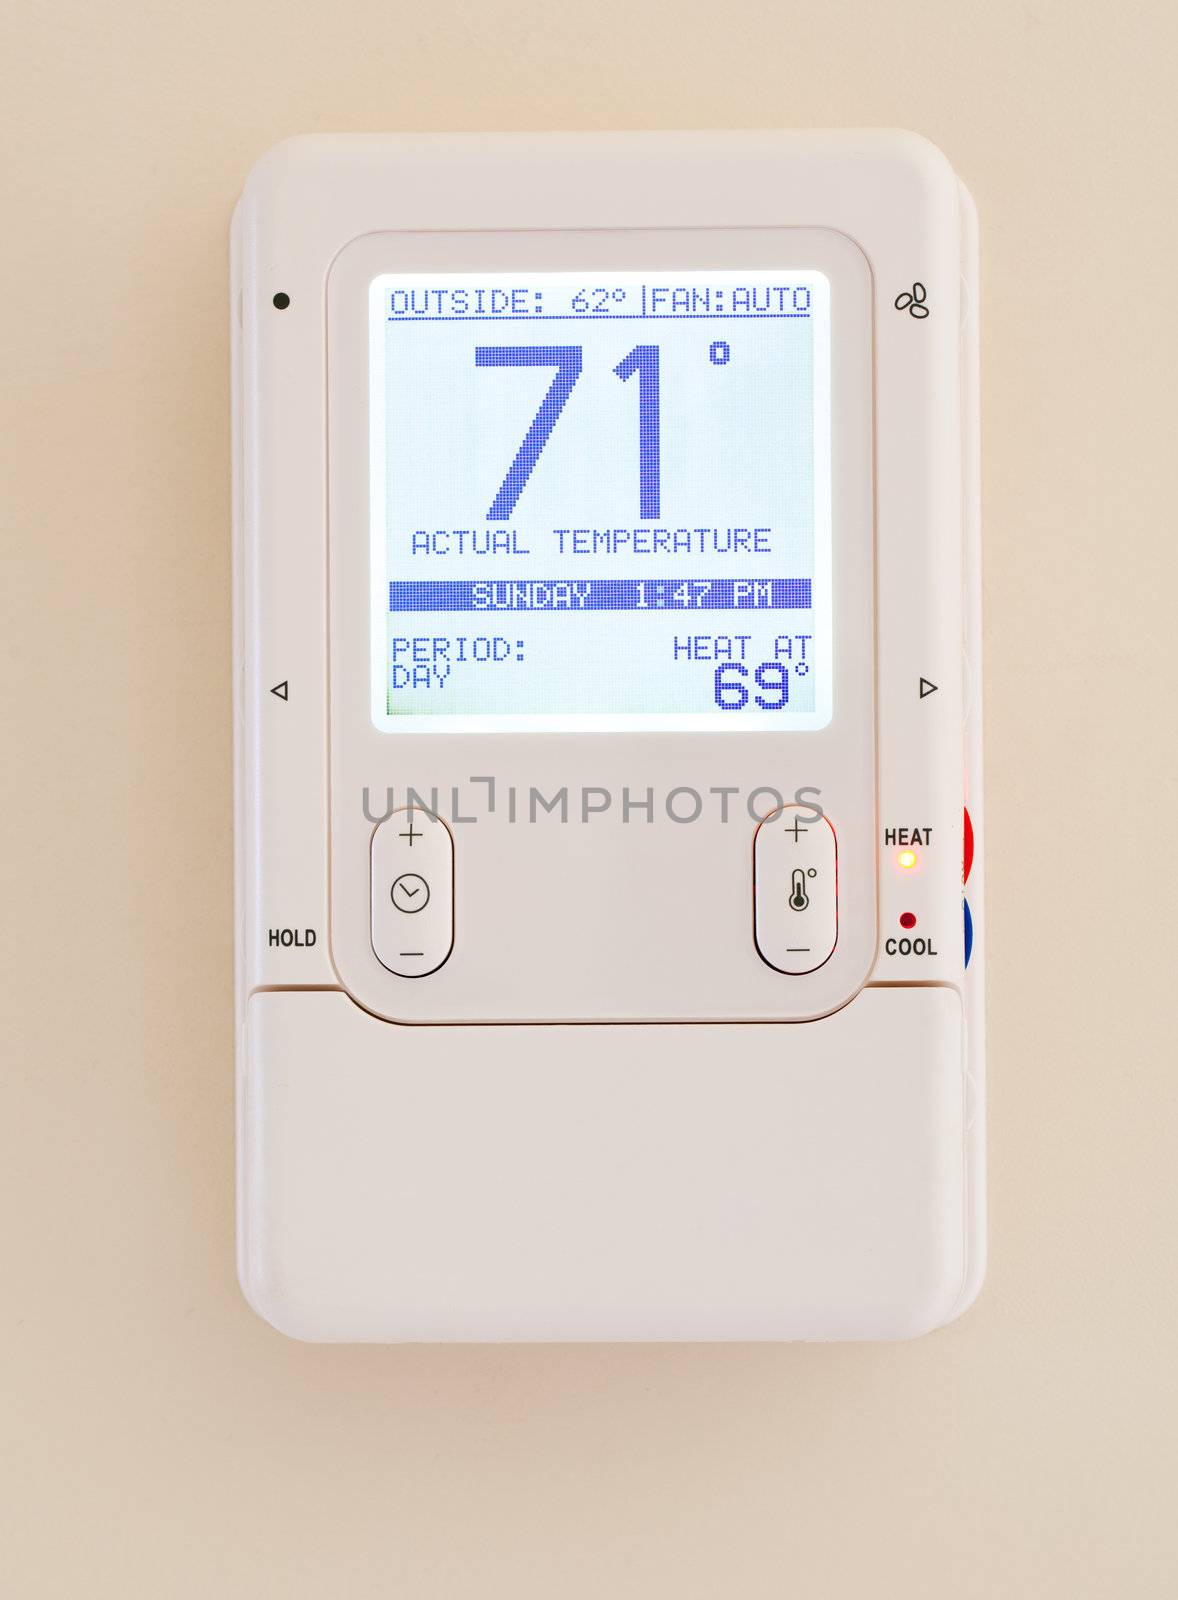 Electronic thermostat with blue LCD screen for controlling air conditioning and heating HVAC